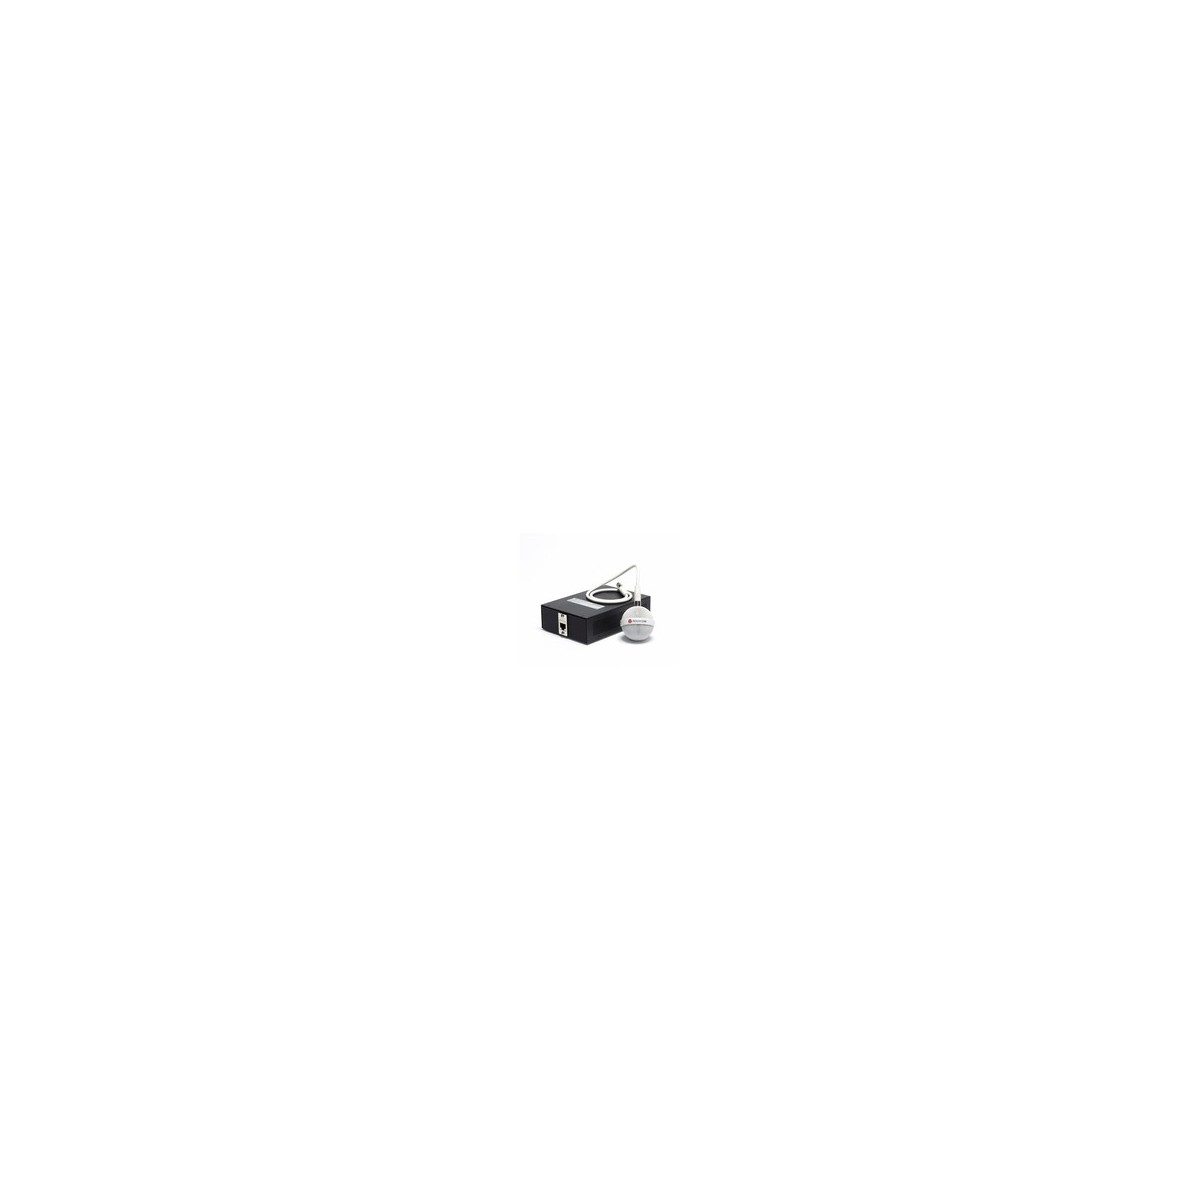 Poly 2200-23810-002 - Wired - Black - White - 0.6 m